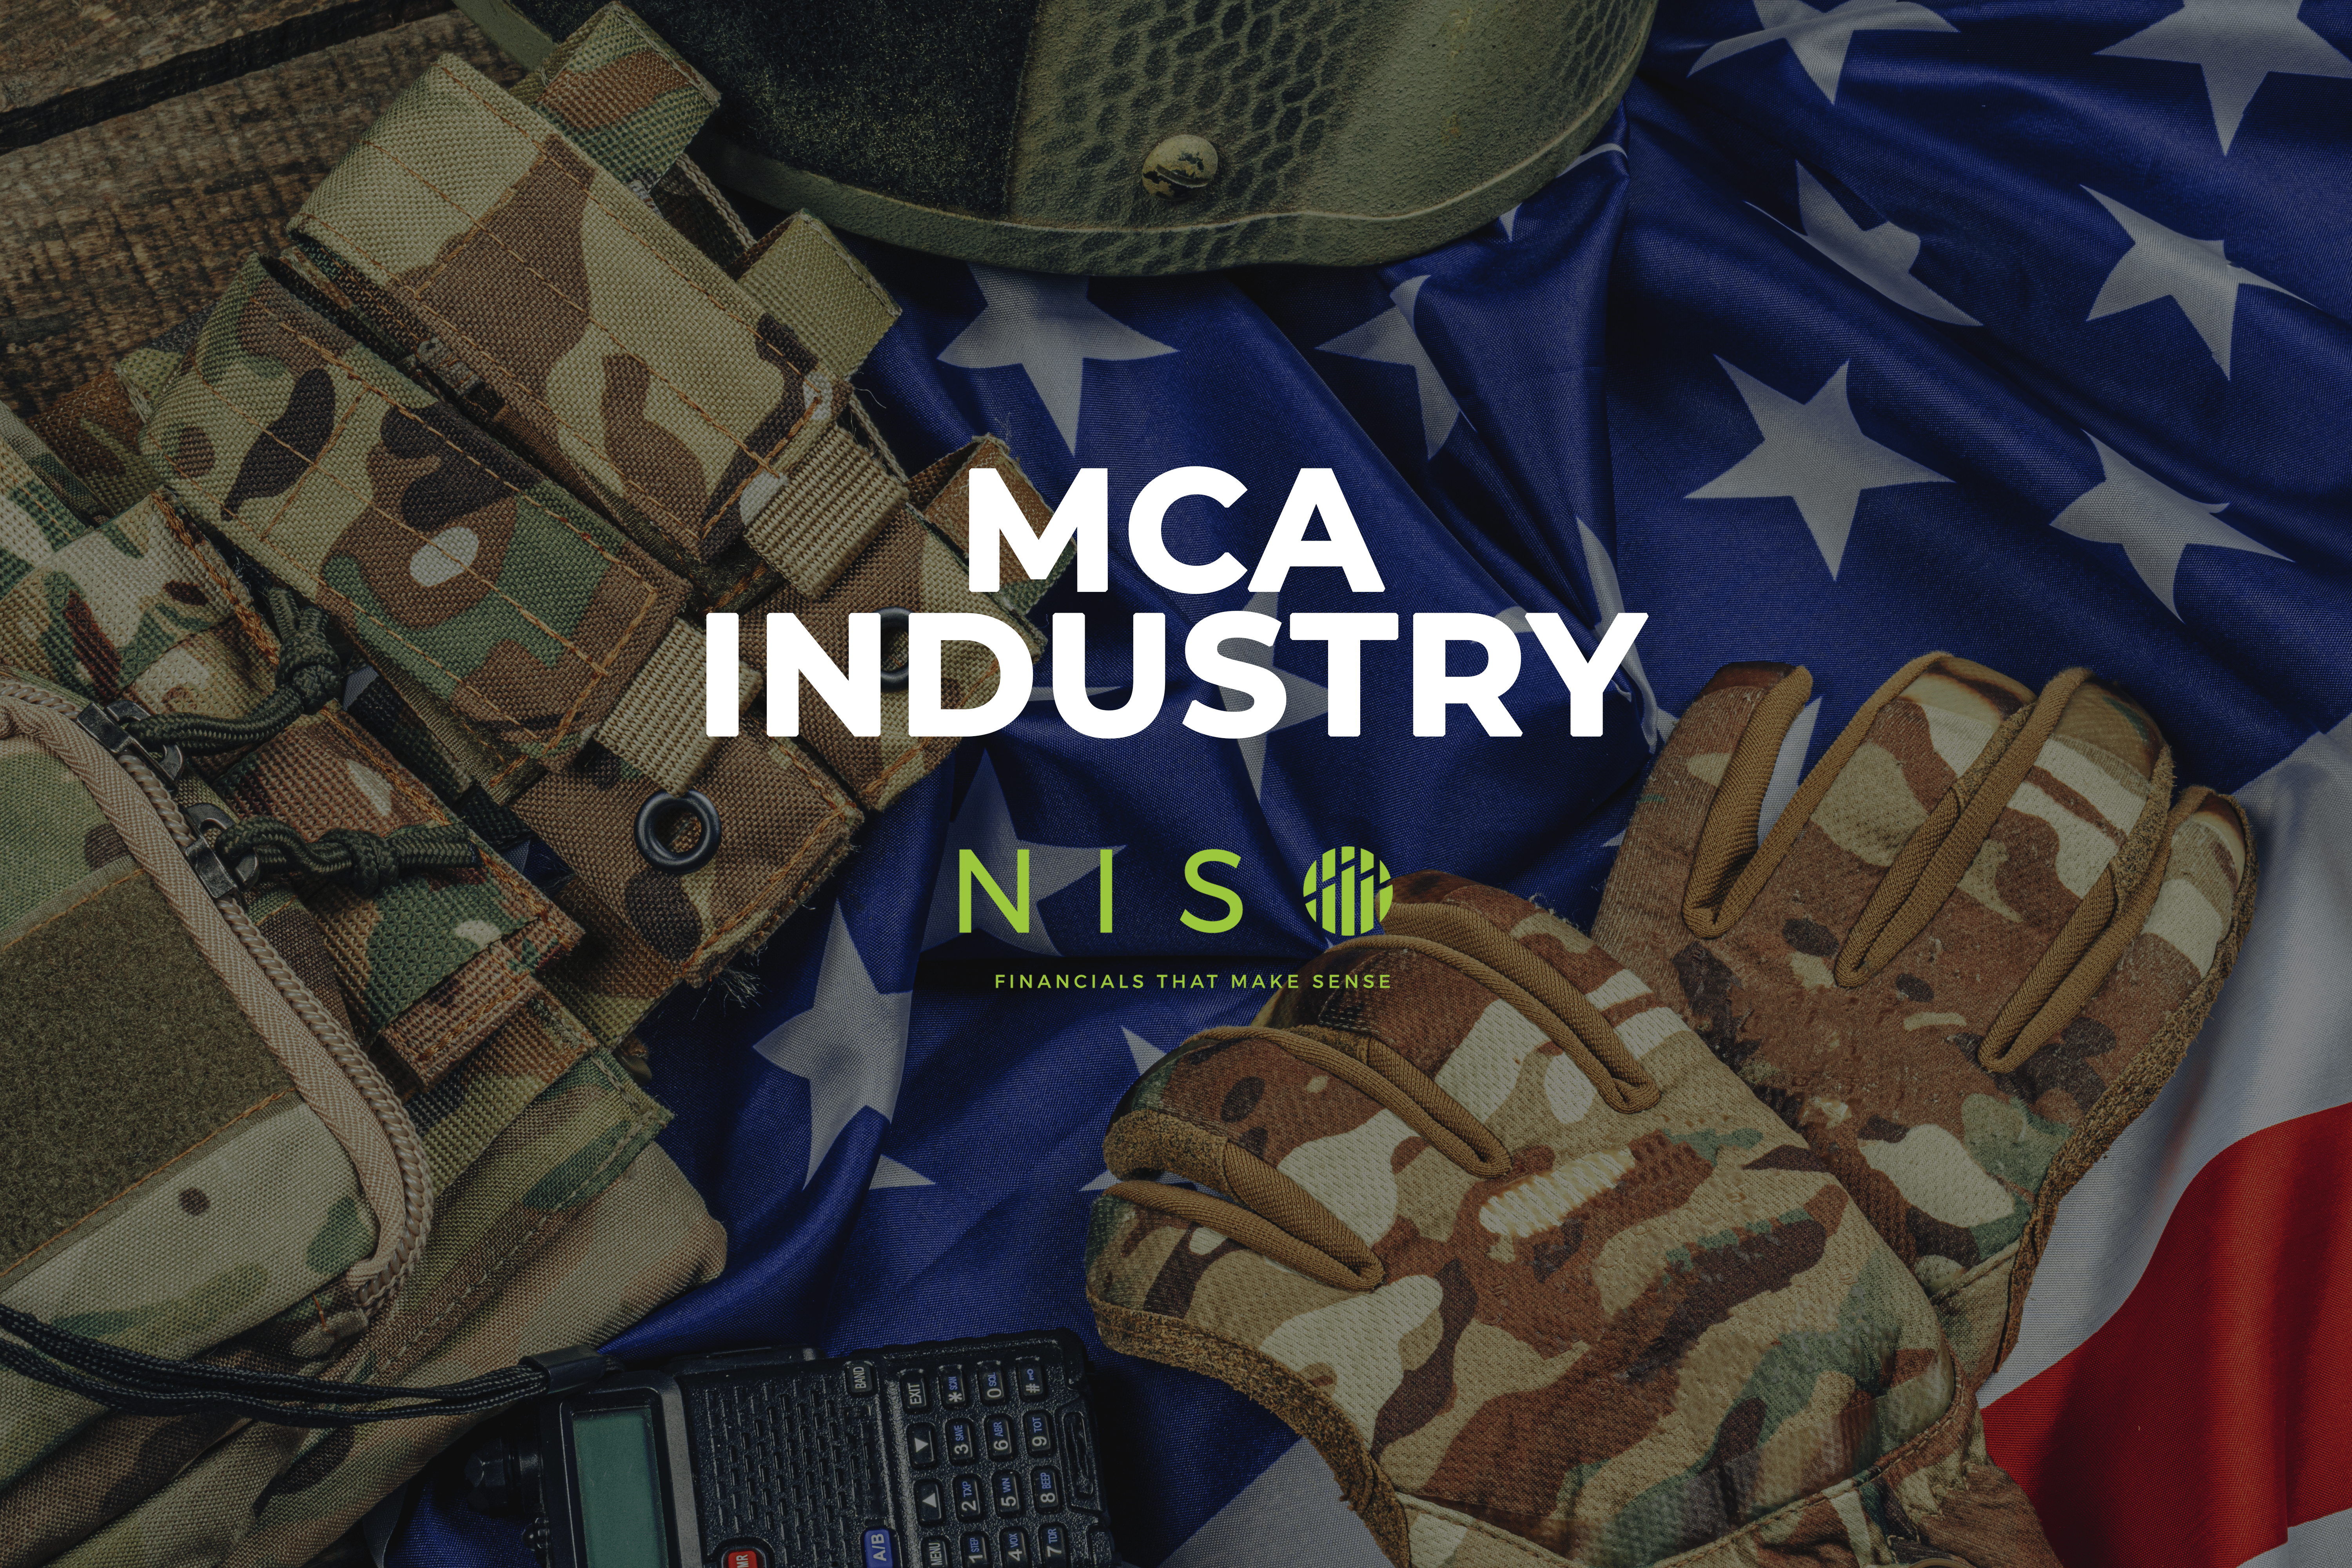 c3i military and mca industry